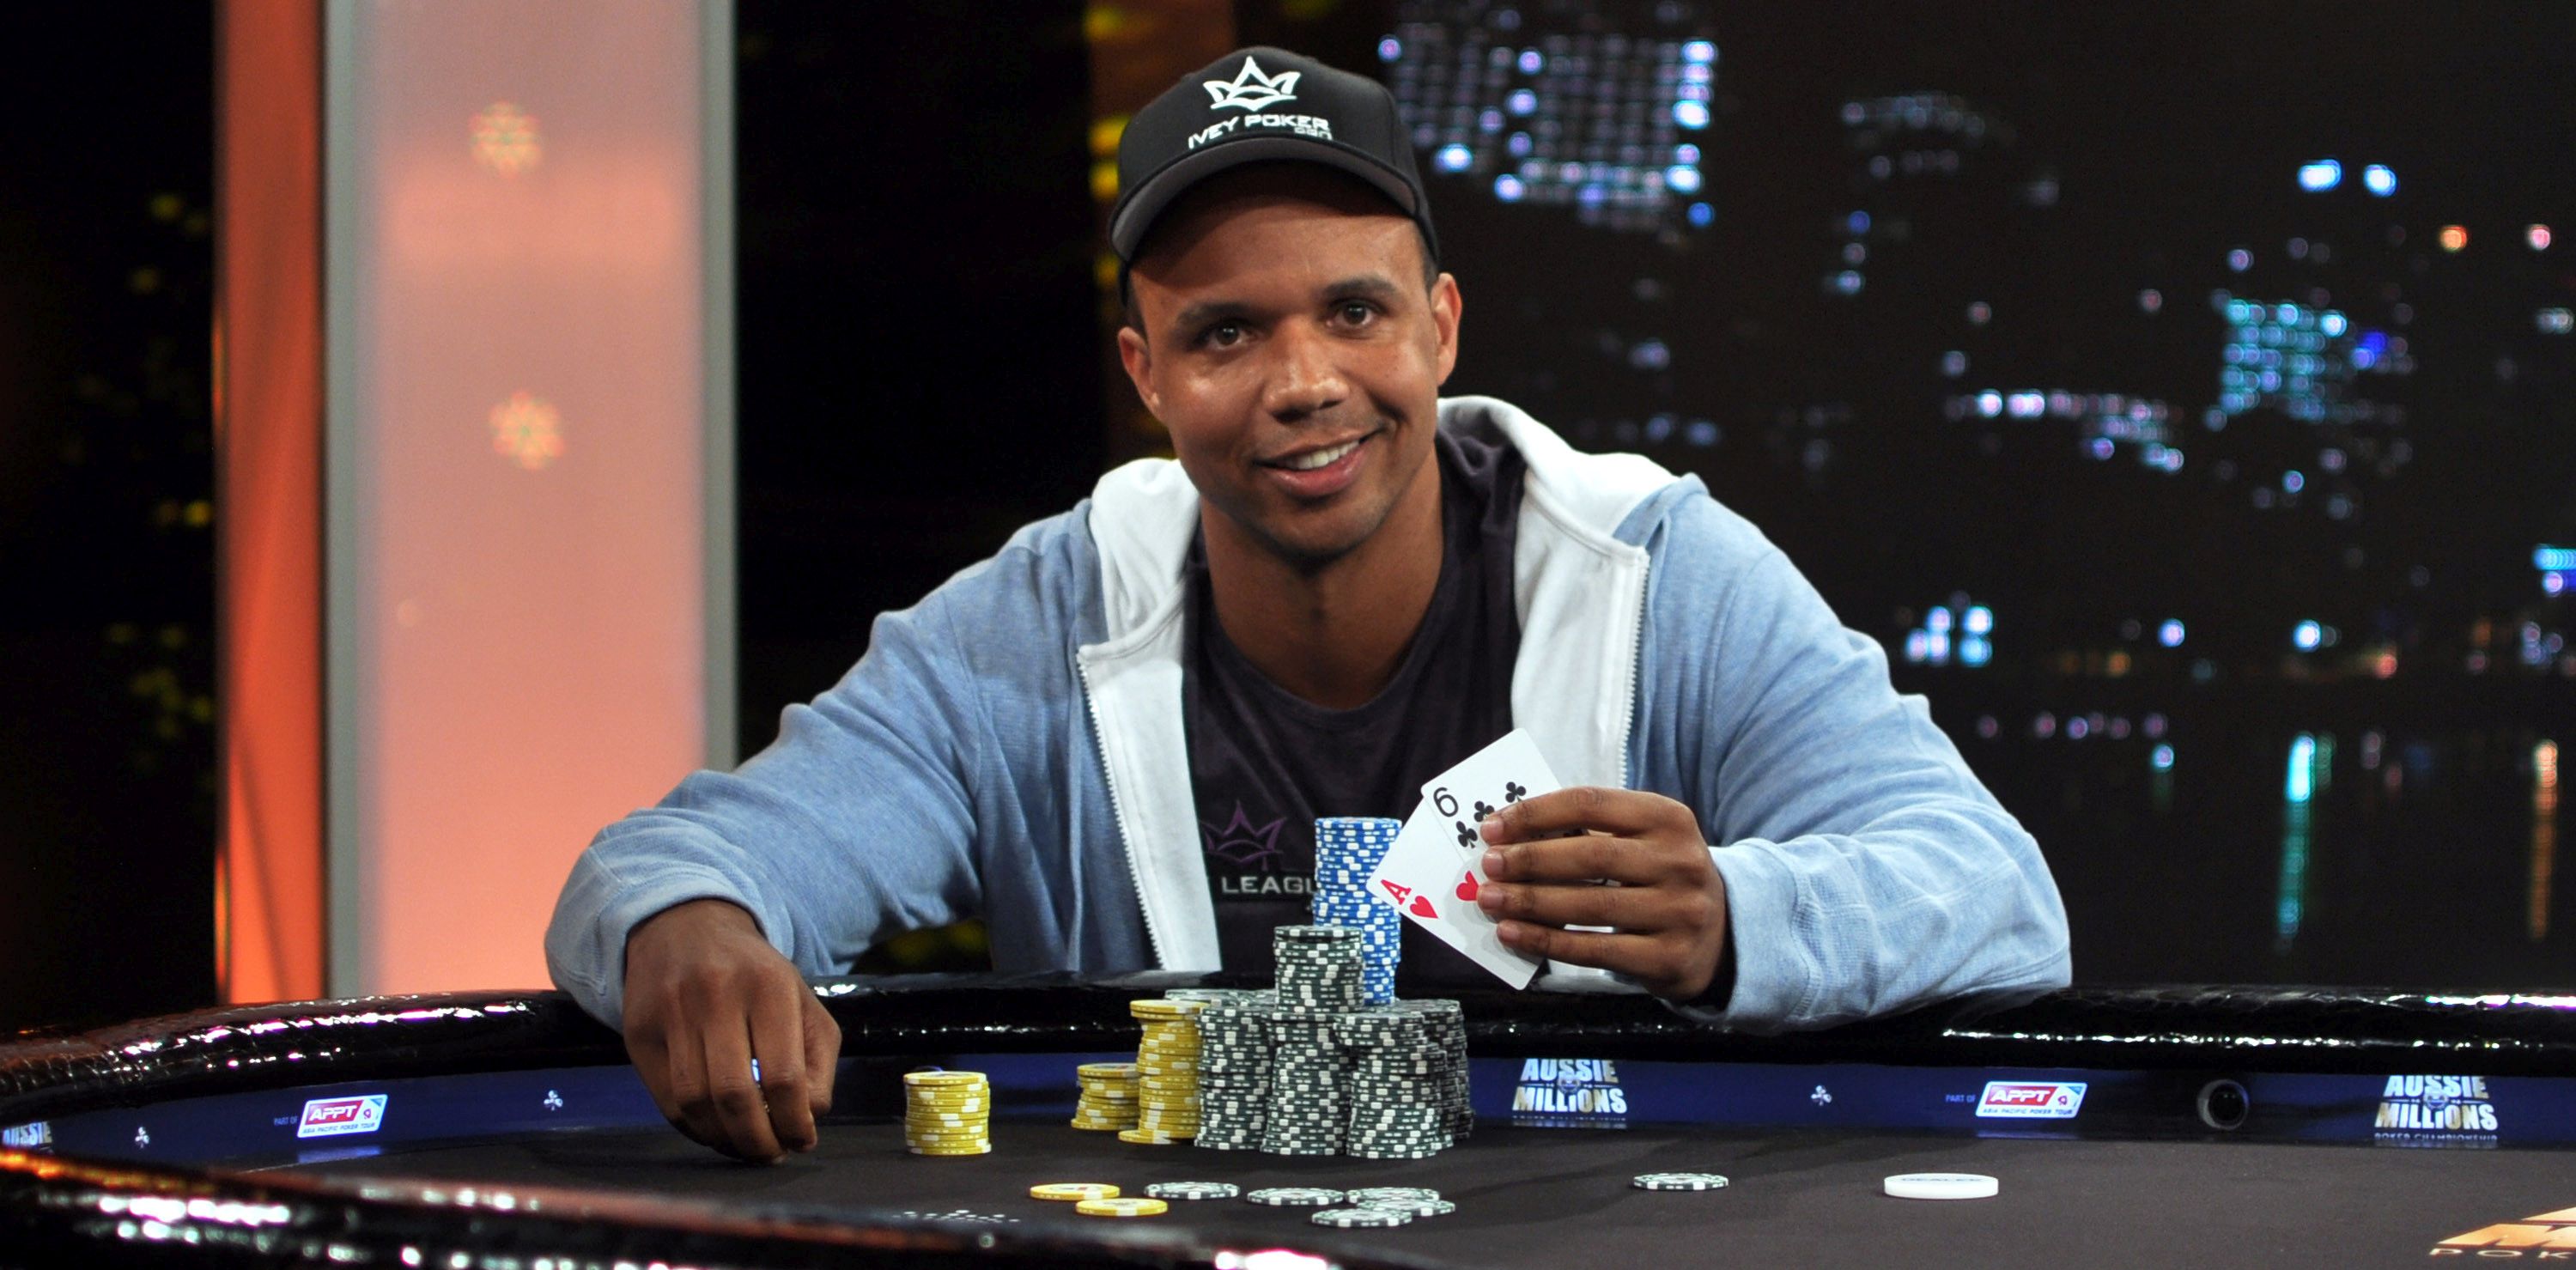 Phil Ivey showing off his chip stack